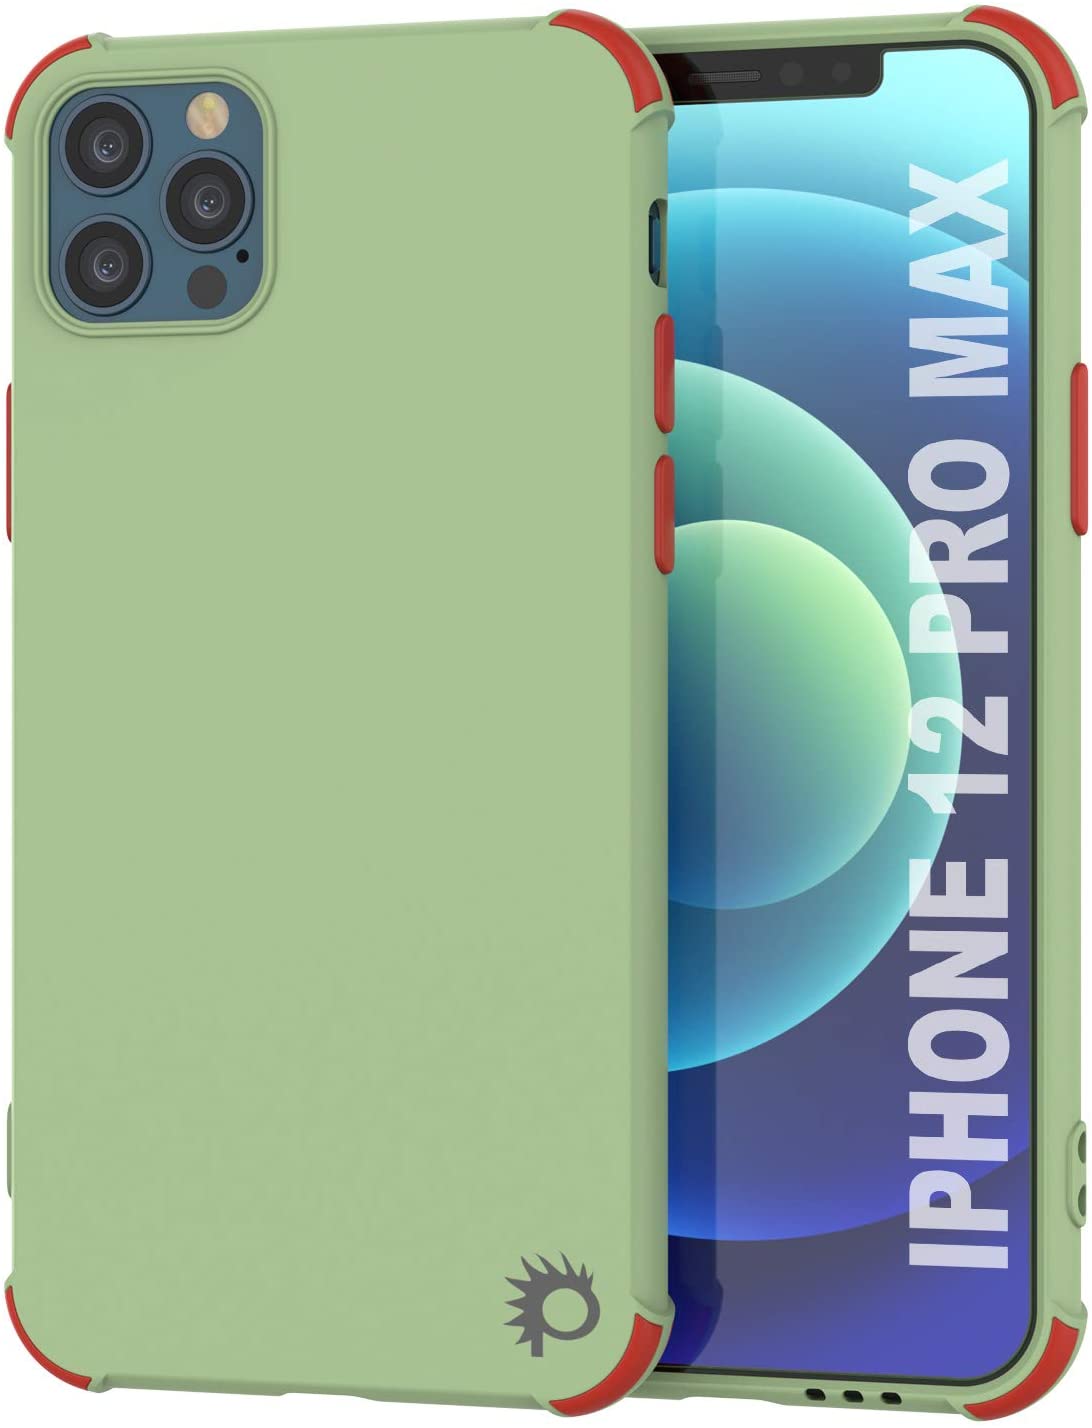 Punkcase Protective & Lightweight TPU Case [Sunshine Series] for iPhone 12 Pro Max [Light Green] (Color in image: Light Green)